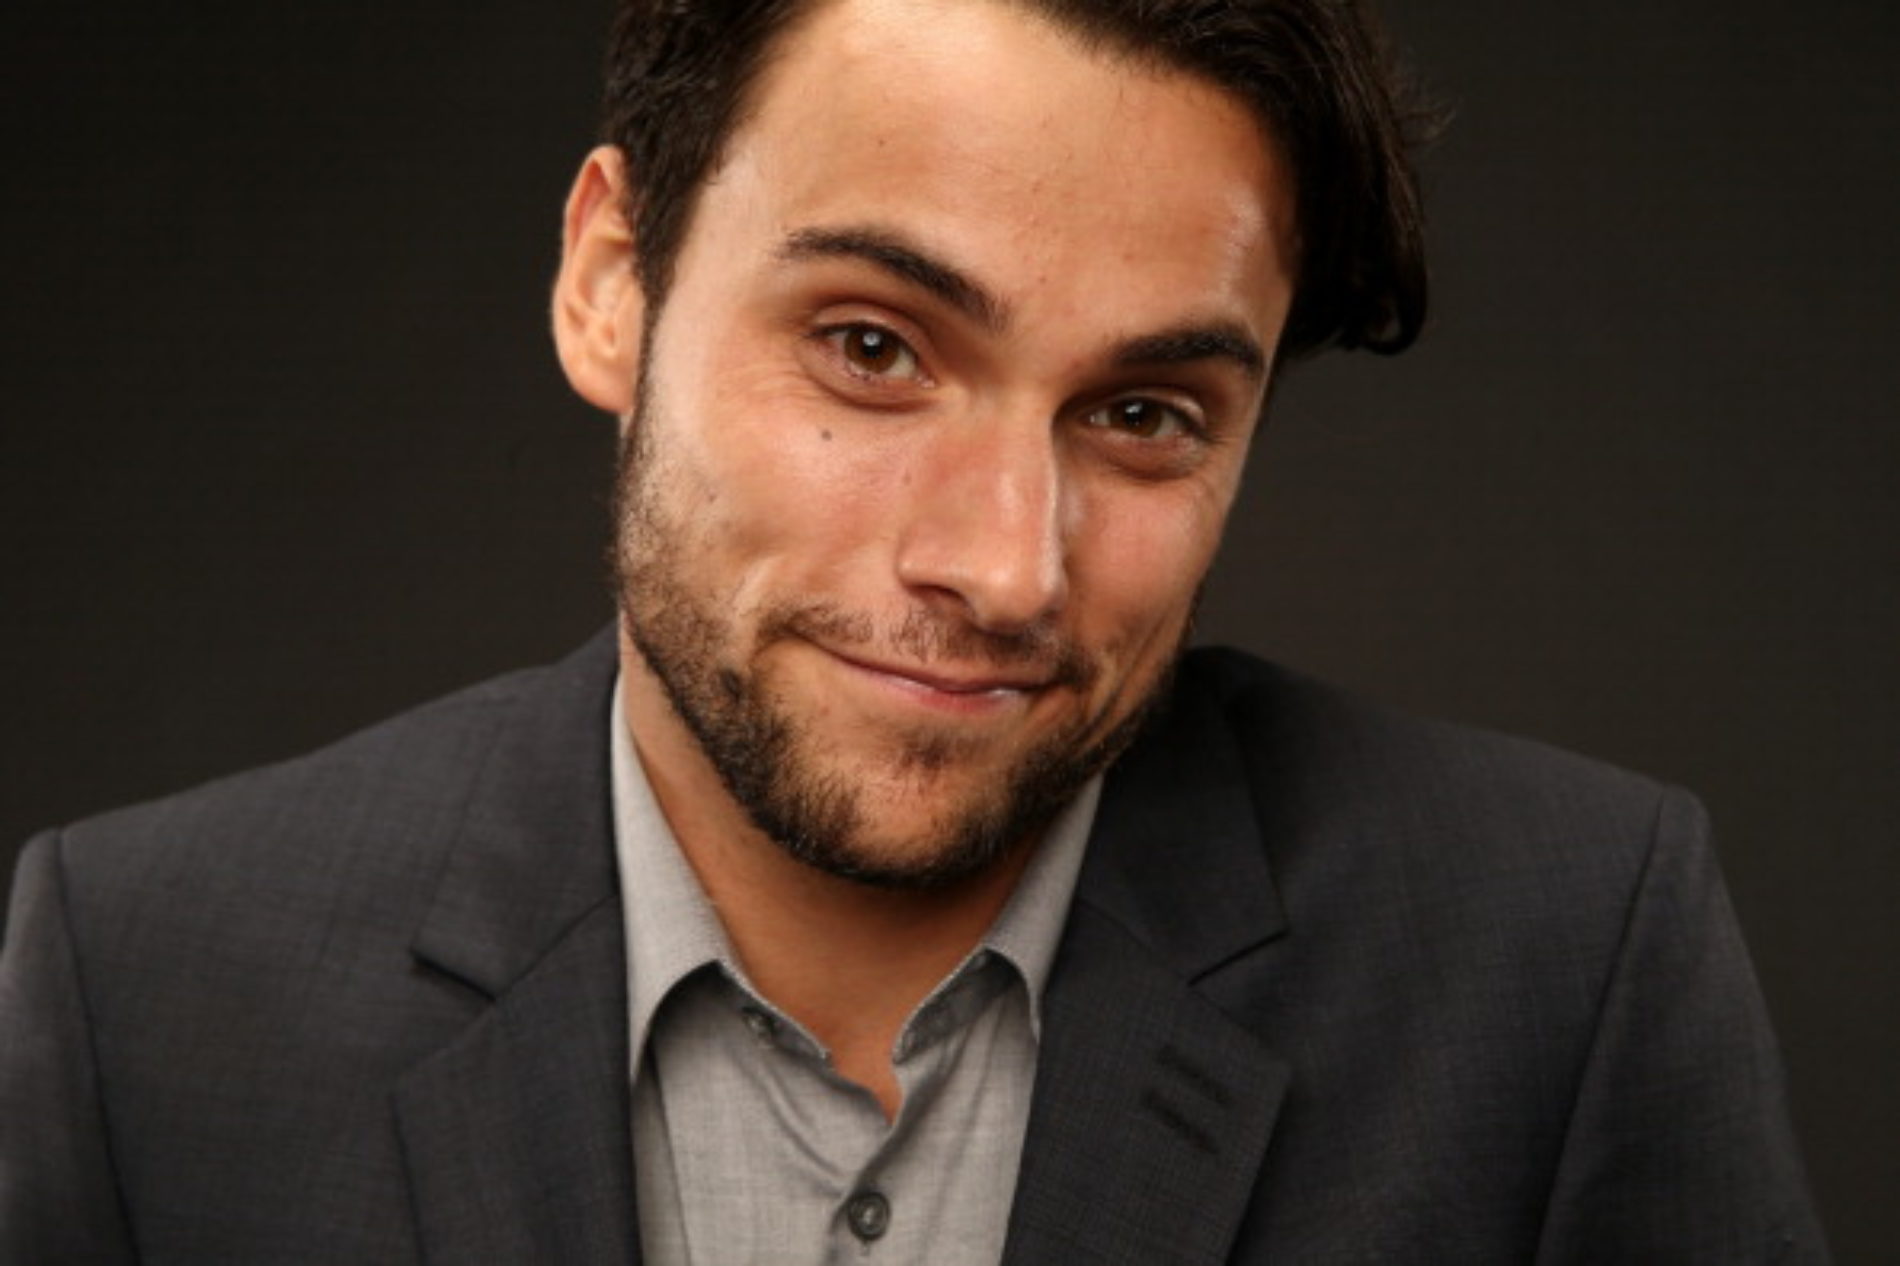 How To Get Away With Murder’s Jack Falahee Not Worried About Being Typecast In Gay Roles